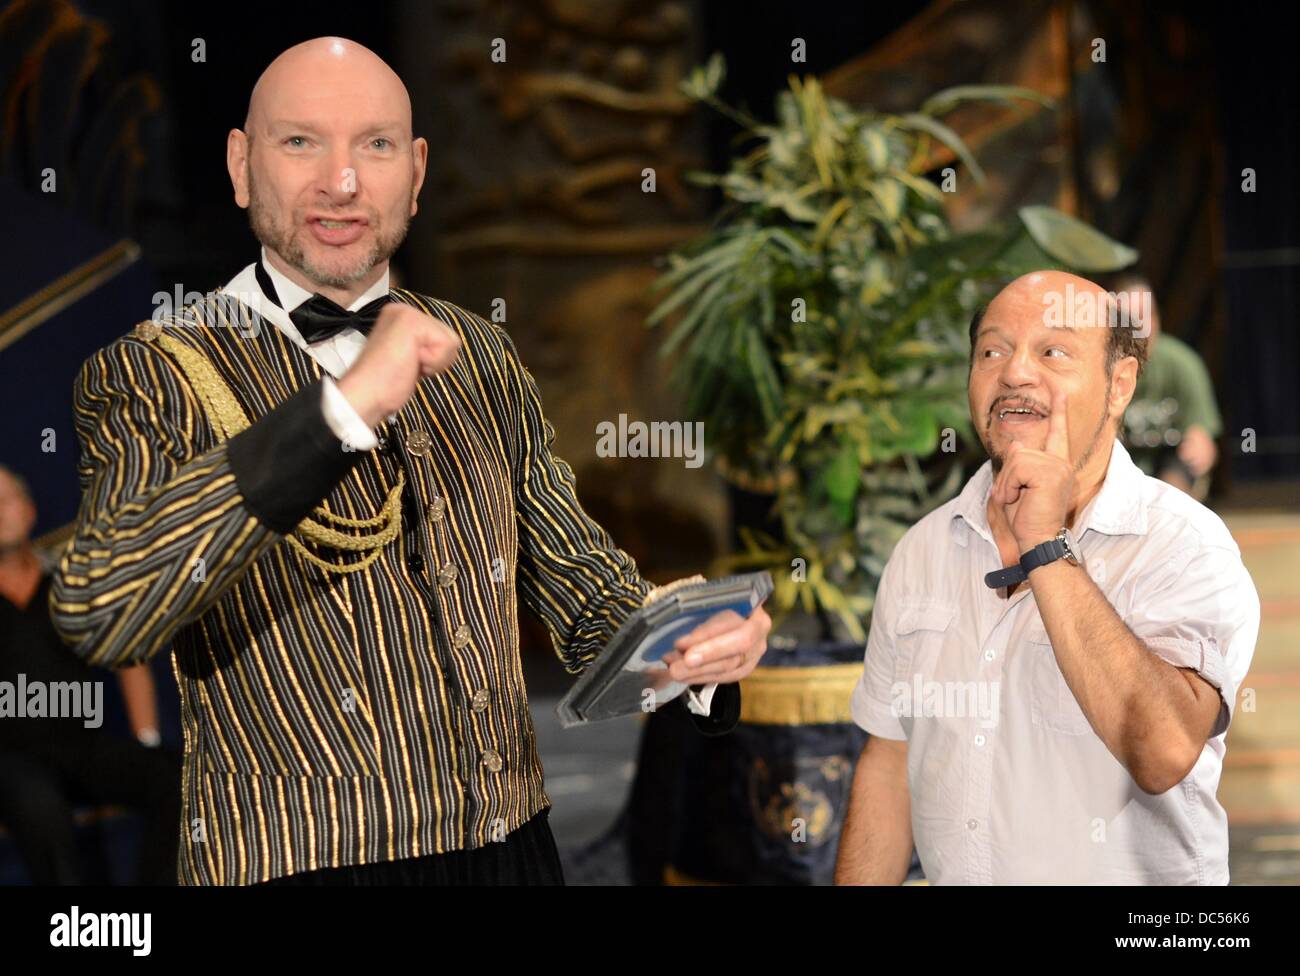 Ralph Morgenstern as head waiter Miska (L) and Hungarian director Miklos-Gabor Kerenyi rehearse 'A Csardaskiralyno' at the Budapest Operetta in Budapest, Hungary, 05 August 2013. The operetta will be premiered at the Seefestspiele festival at the Waldbuehne in Berlin on 17 August 2013. Photo: Jens Kalaene Stock Photo